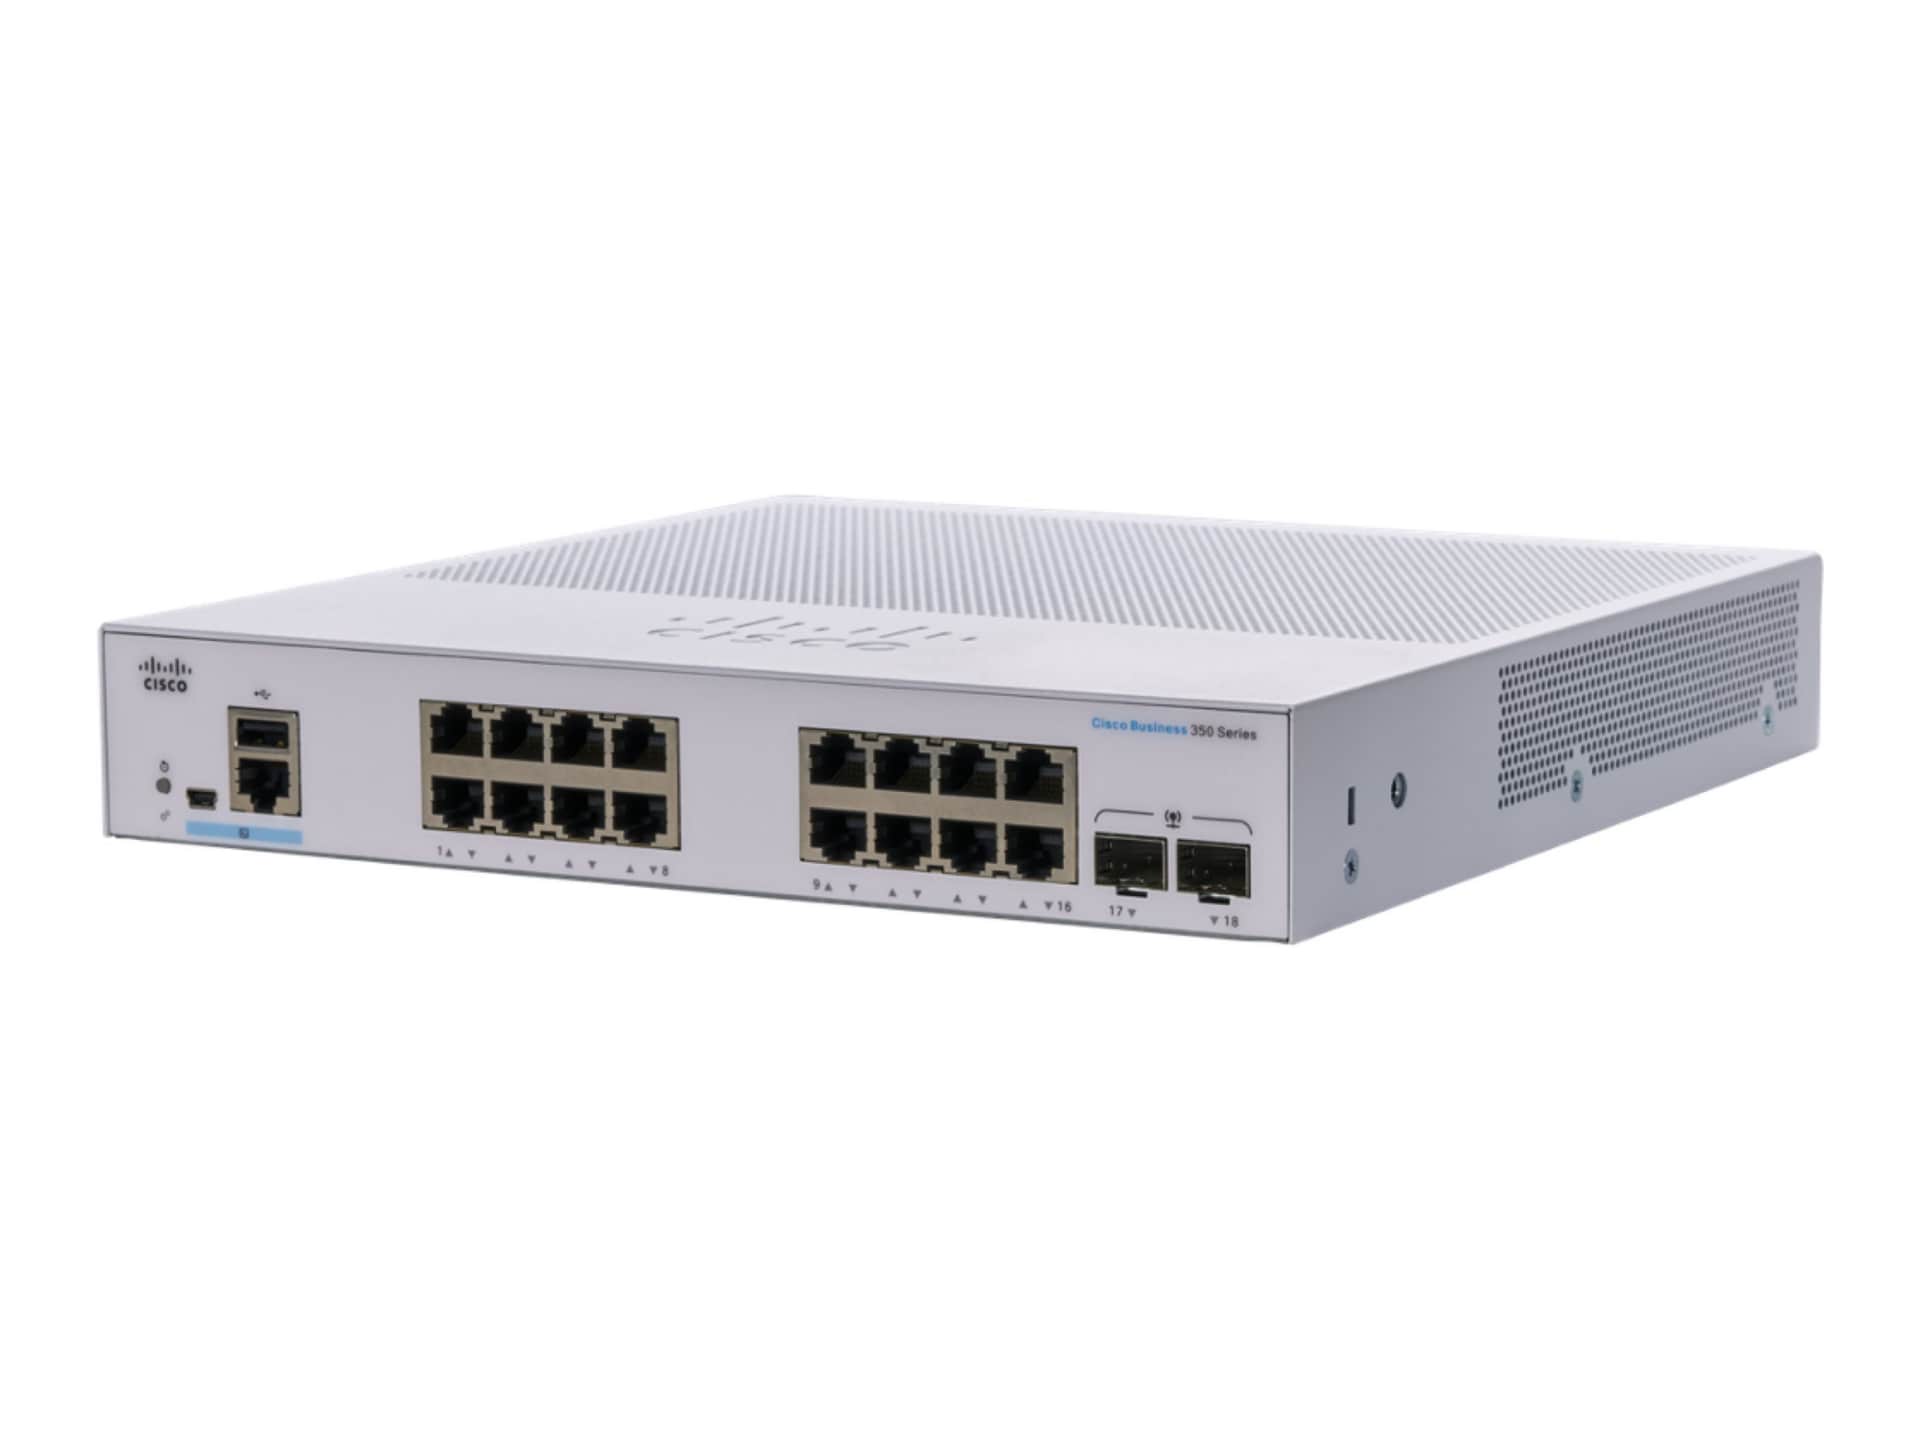 Cisco Business 350 Series 350-16T-E-2G - switch - 18 ports - managed - rack